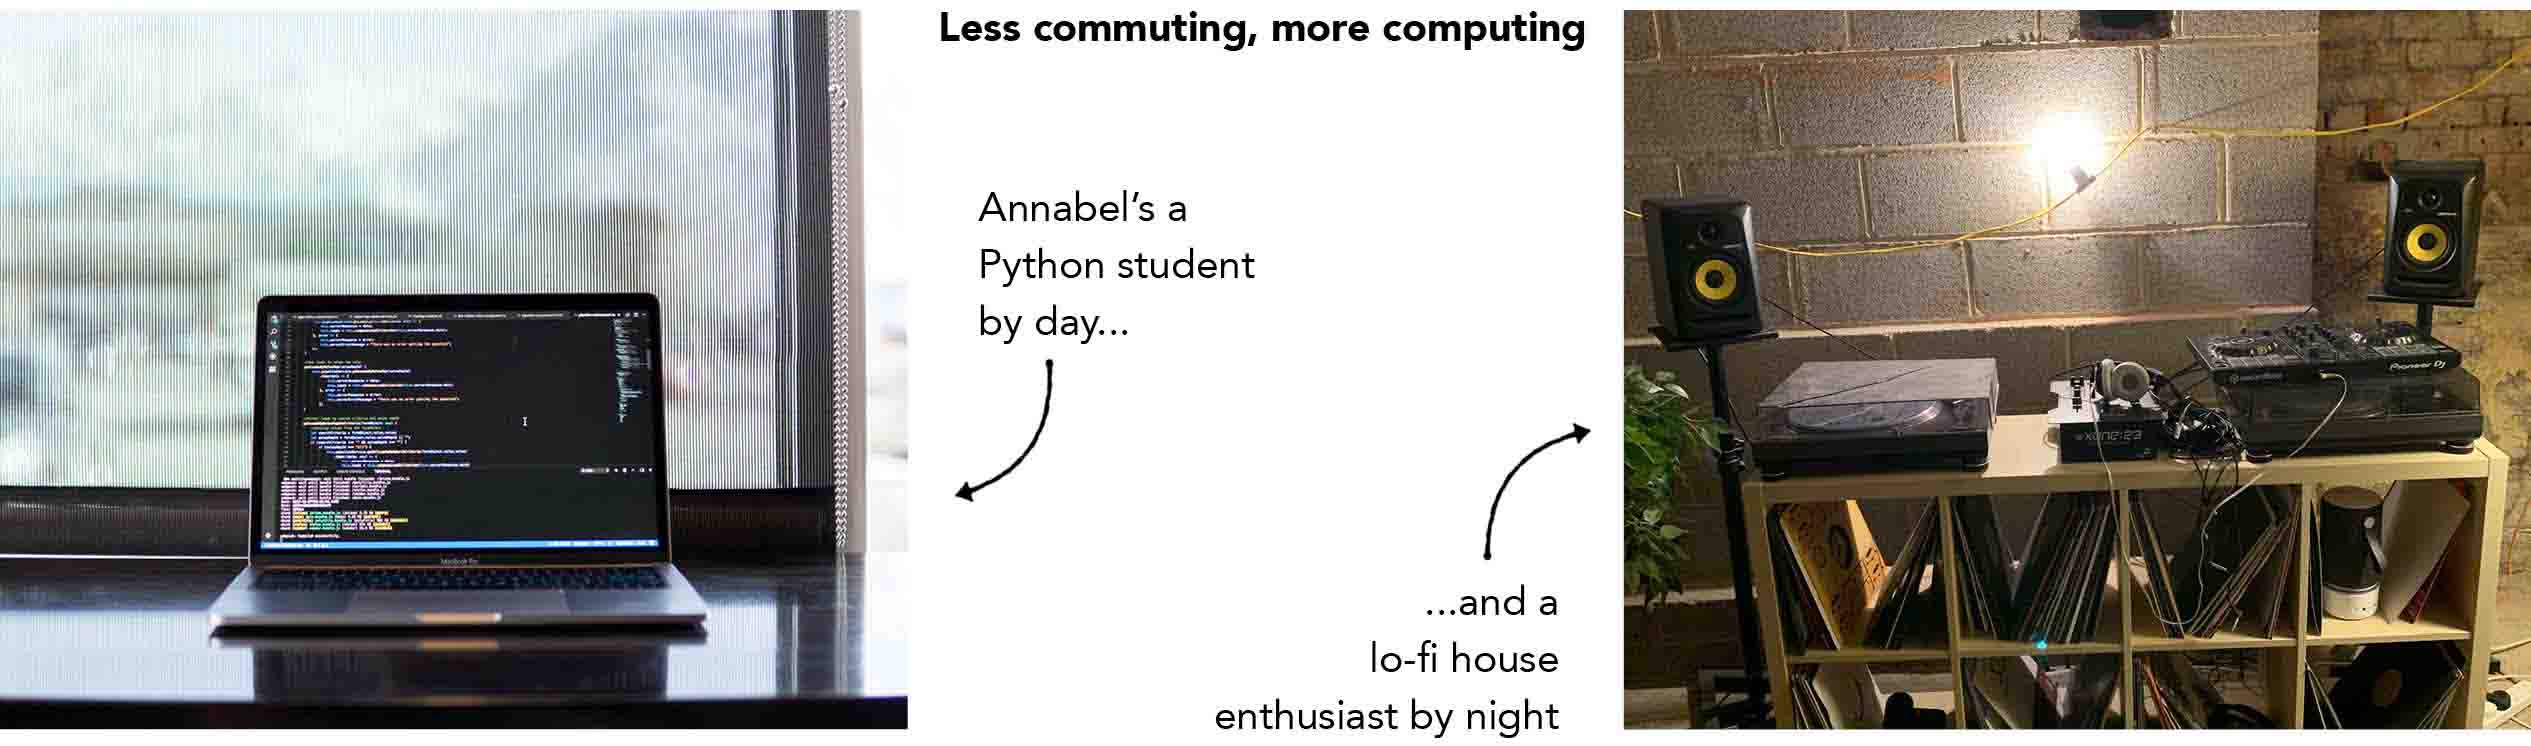 Annabel's been studying Python by day, and DJing by night...)